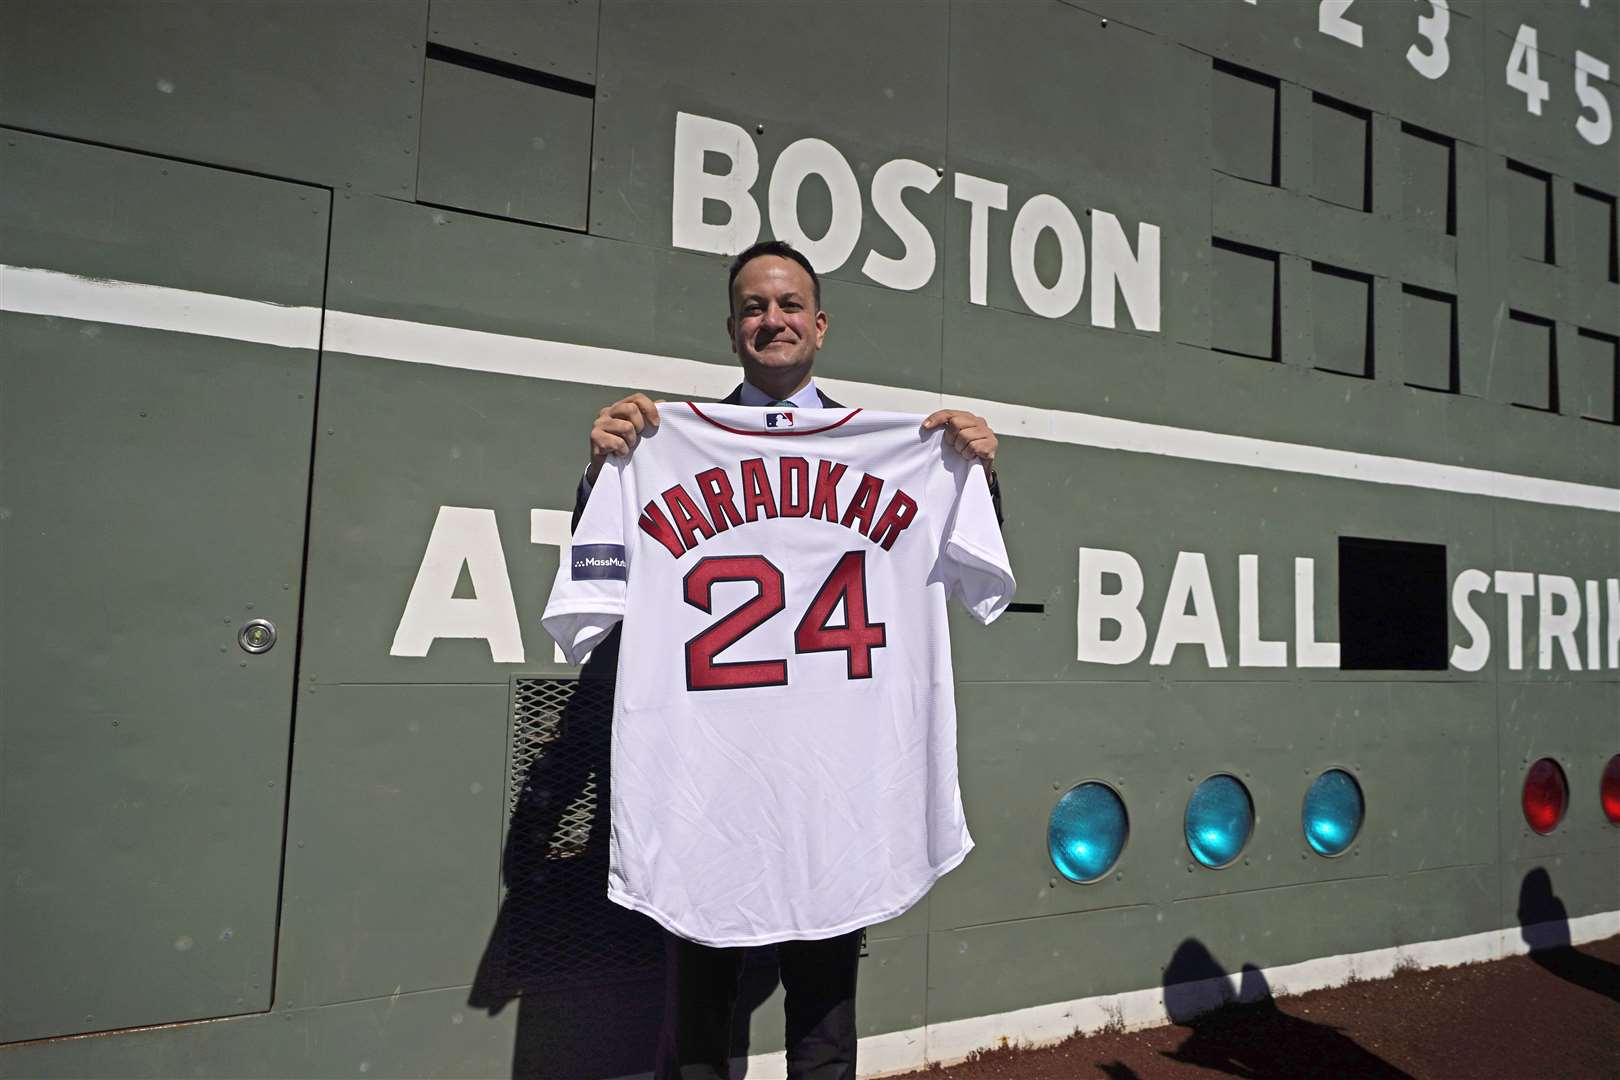 Taoiseach Leo Varadkar during a visit to the home of the Boston Red Sox at Fenway Park (Niall Carson/PA)